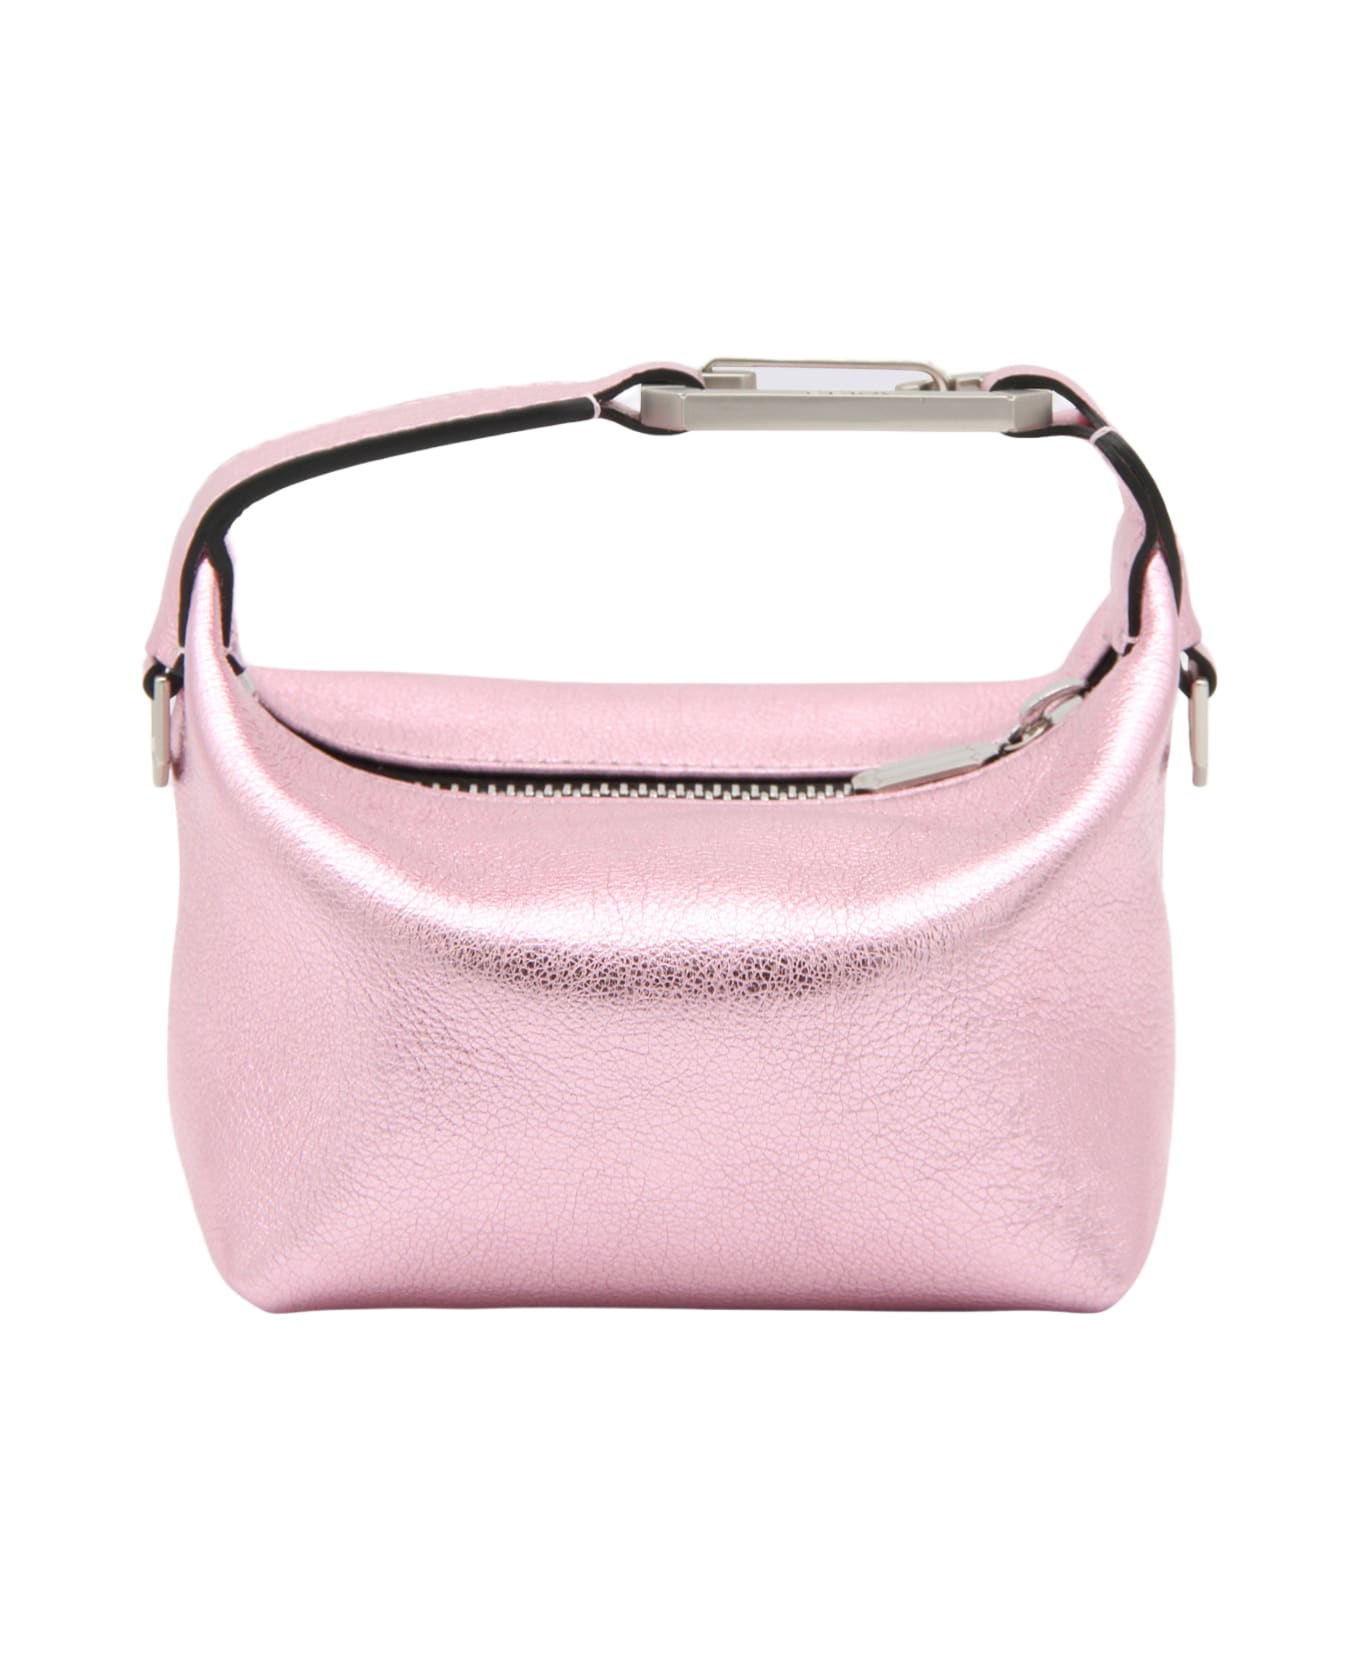 EÉRA Pink Leather Tiny Moon Tote Bag